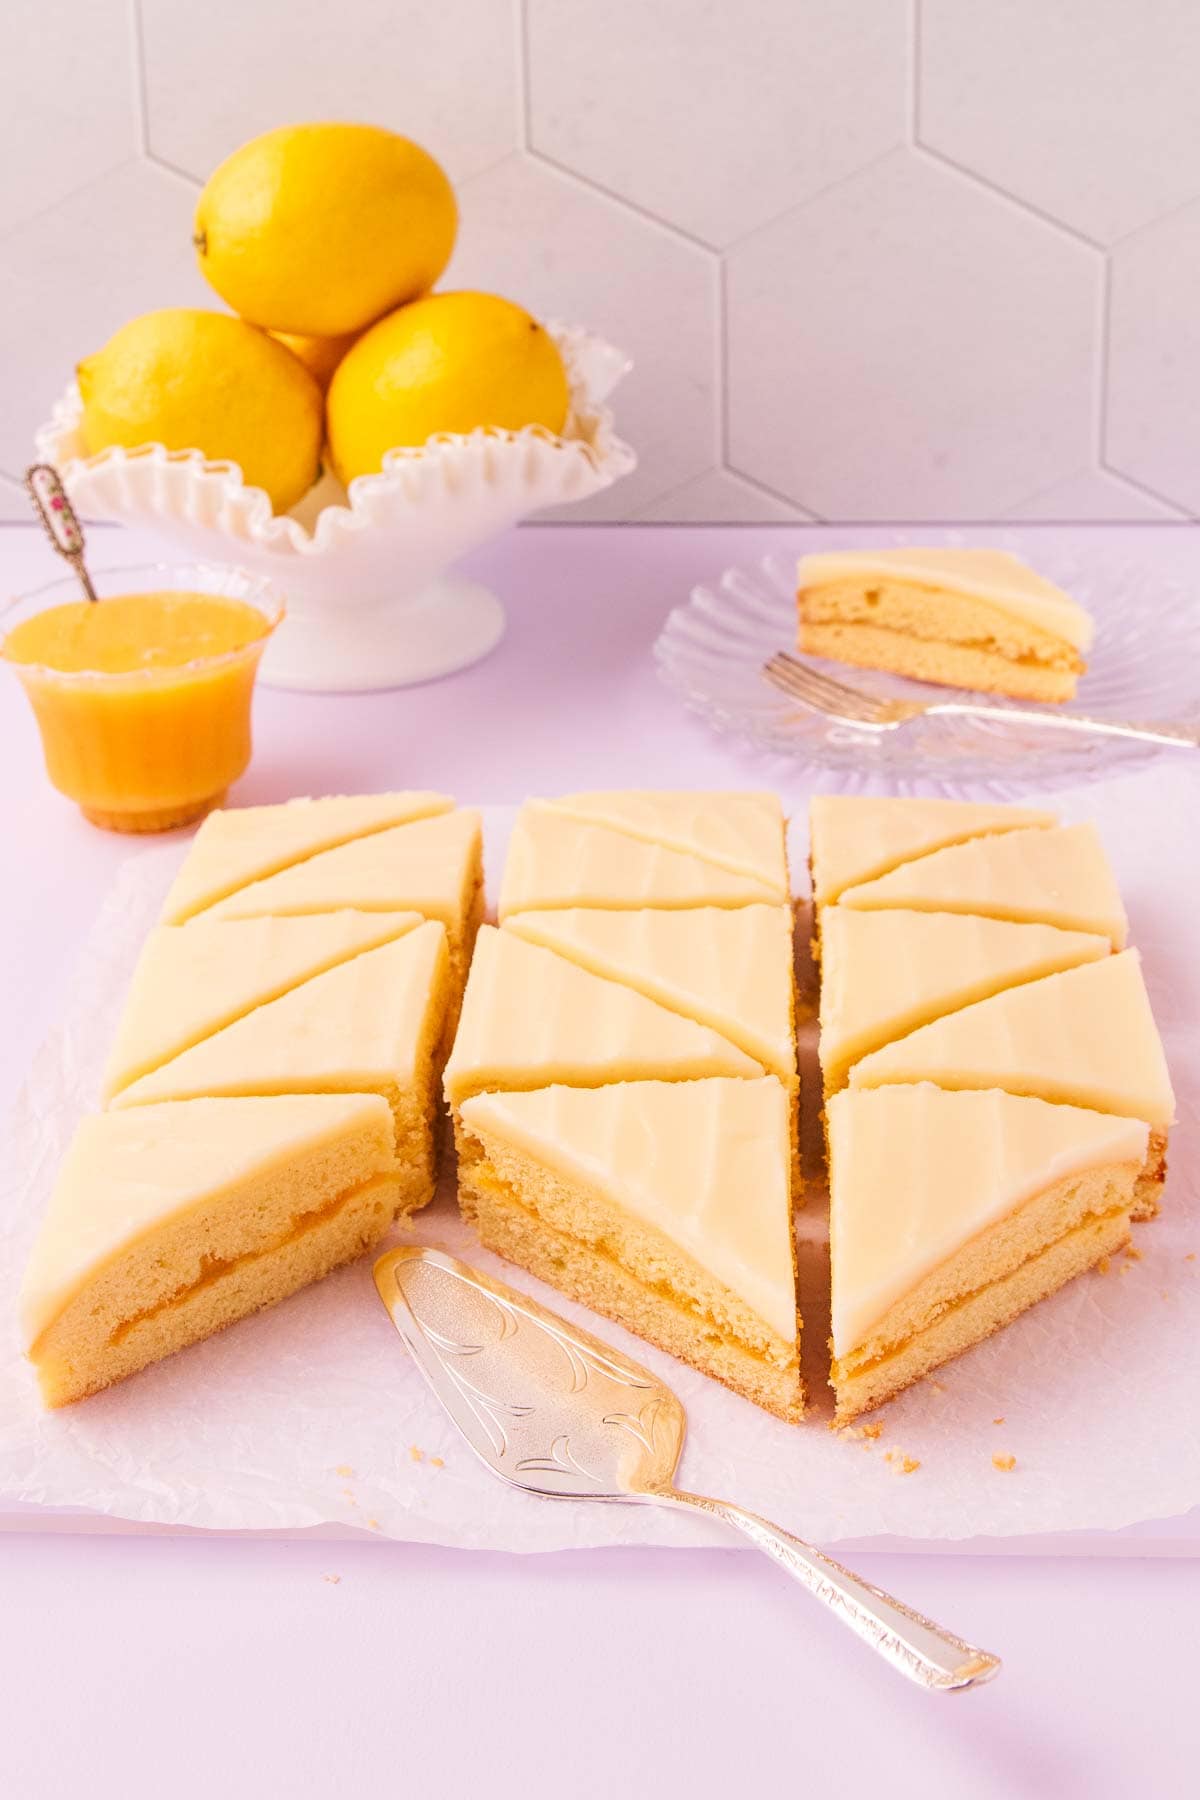 The pieces of lemon slice on a sheet of crinkled baking paper, with a silver cake server, a small glass dish of lemon curd and a bowl of lemons in the background.